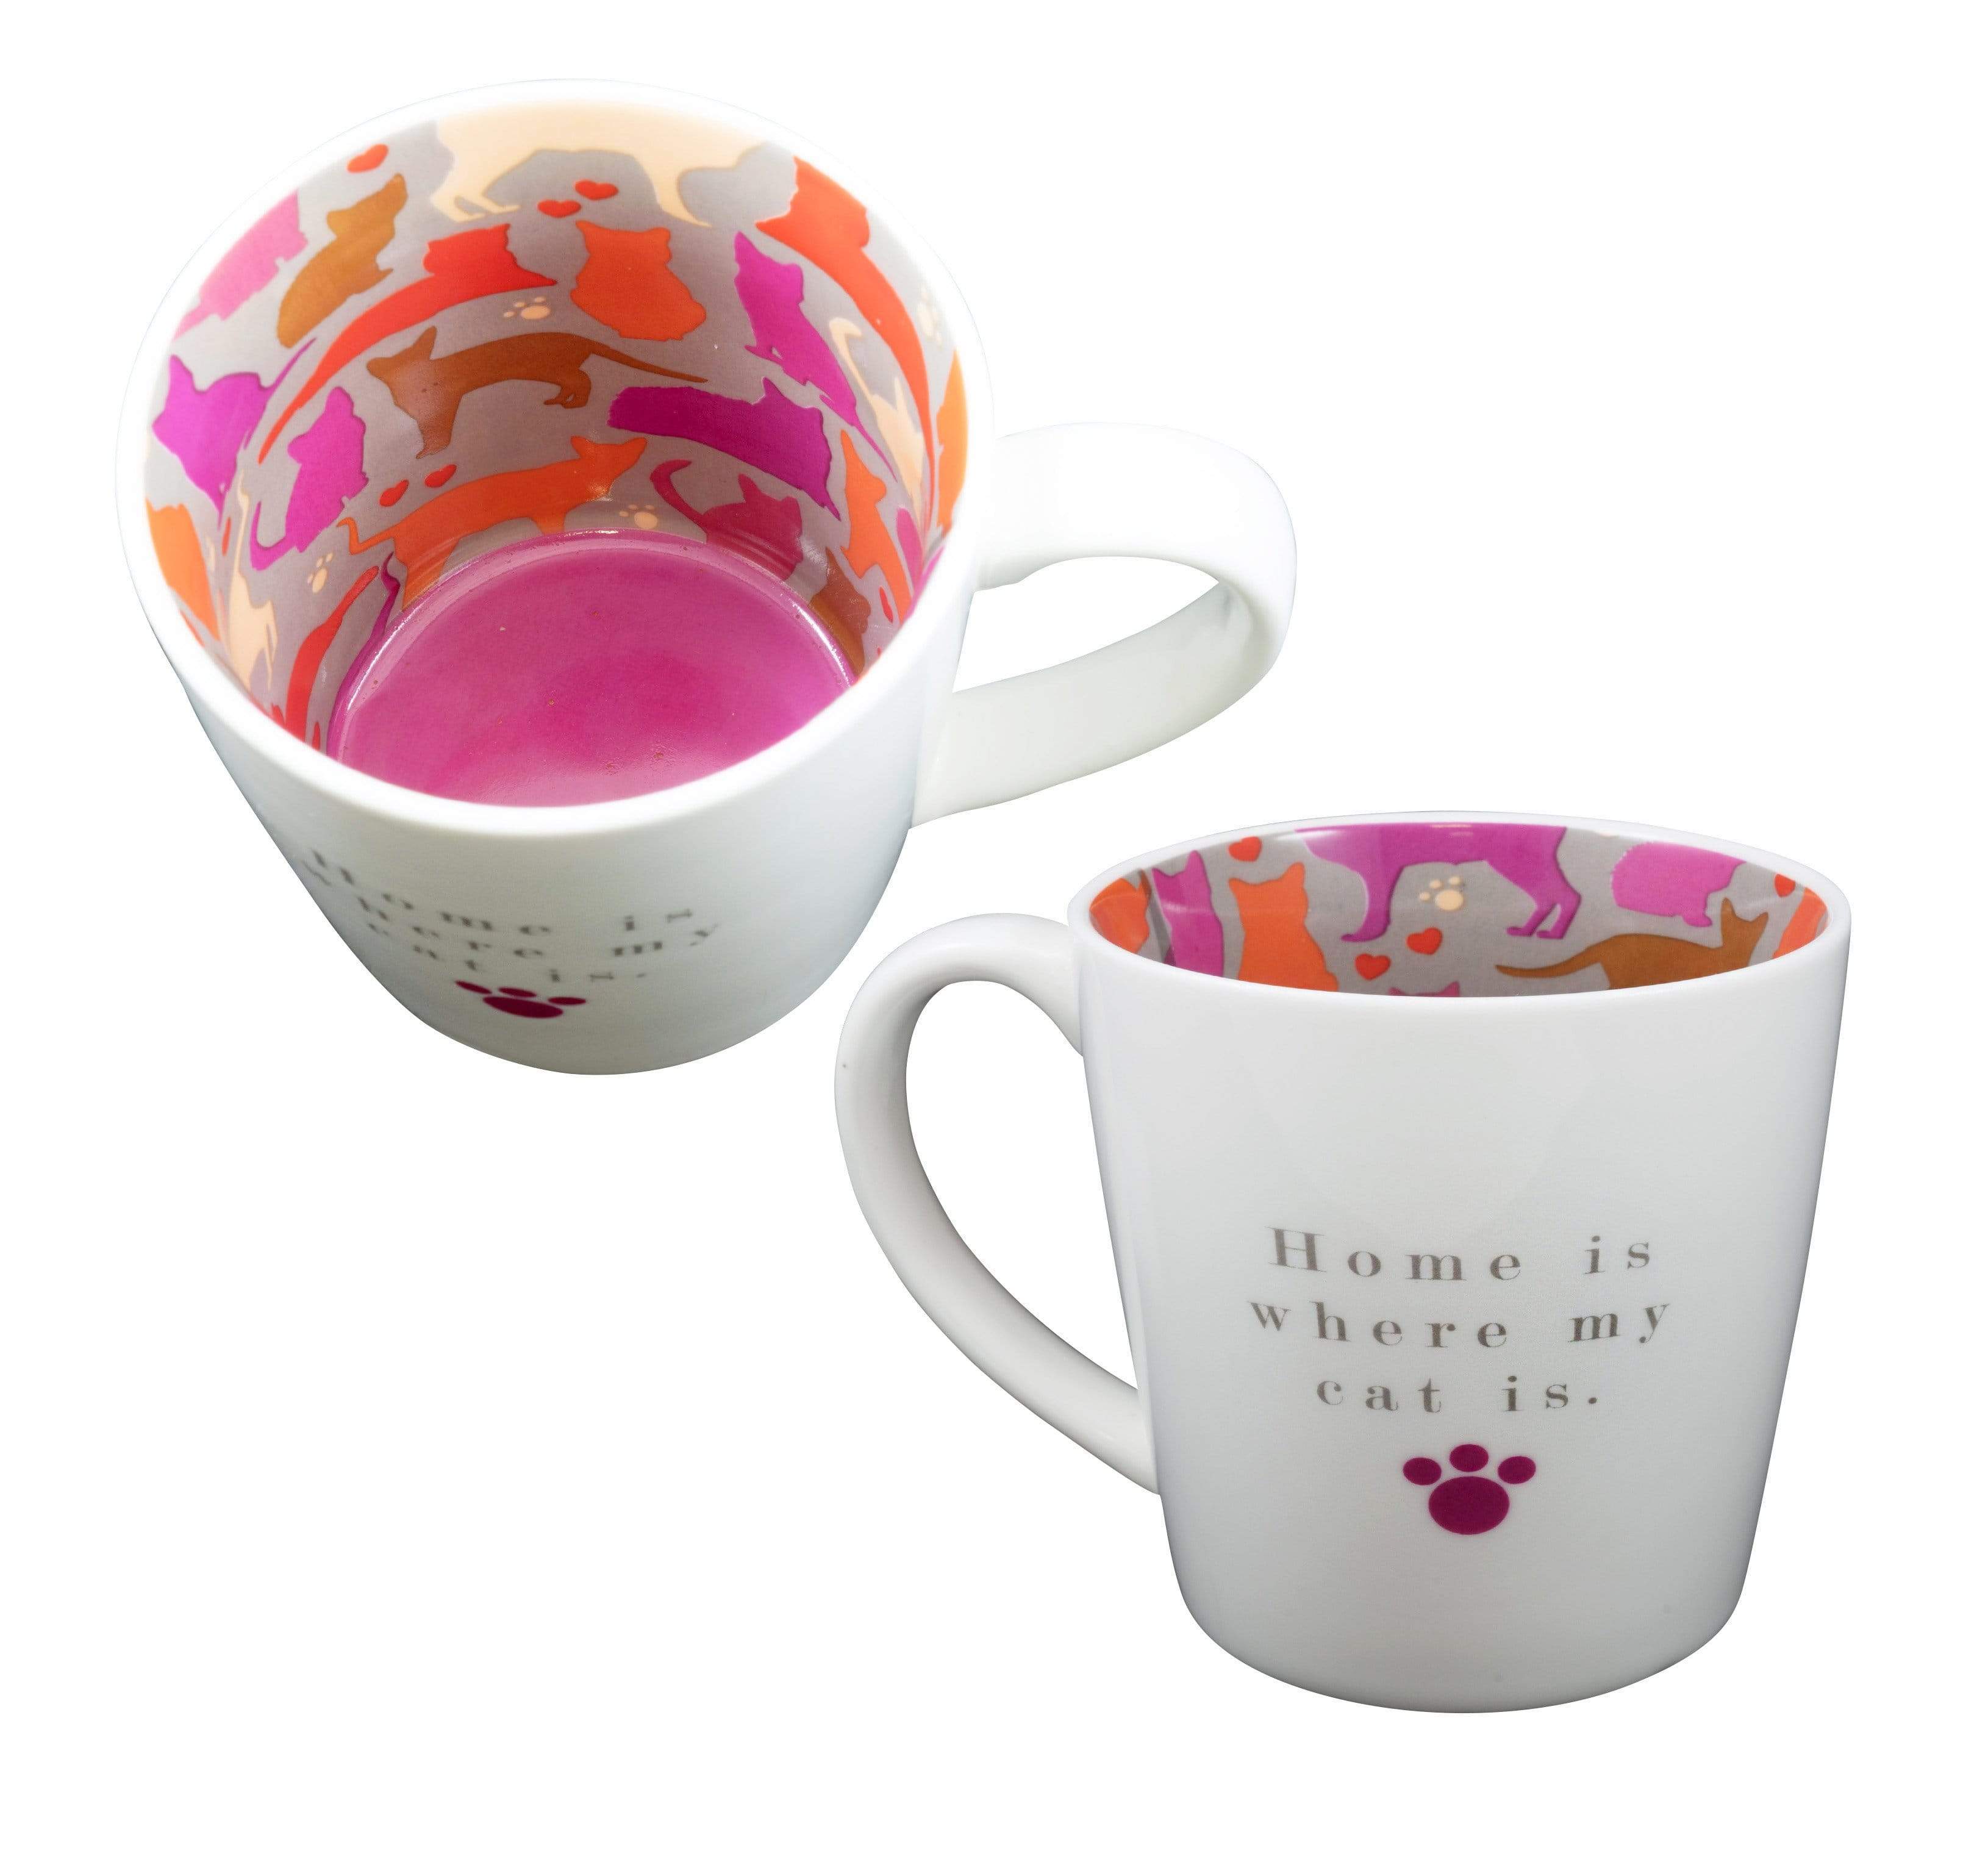 WPL Mug Inside Out Mug With Gift Box - Home is Where my Cat is